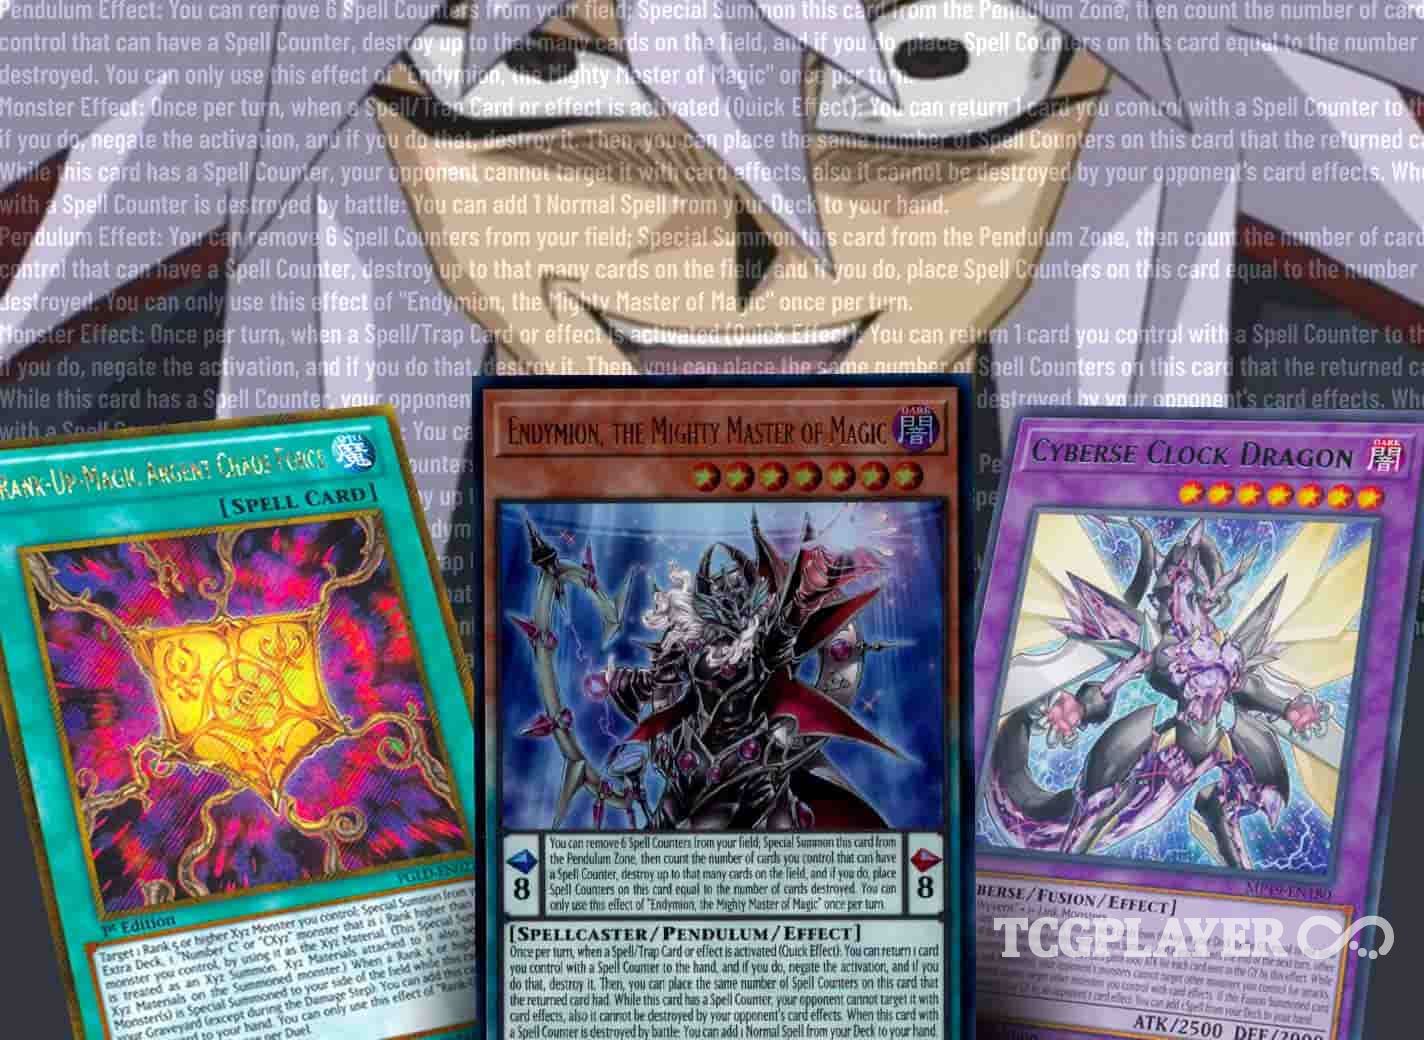 https://mktg-assets.tcgplayer.com/filters:watermark(tcgplayer-cdn-prd,infinite-watermark.png,-30,-80,40)//content/opengraph/YGO-Card-Text-Is-Too-Long-For-Bakura.jpg